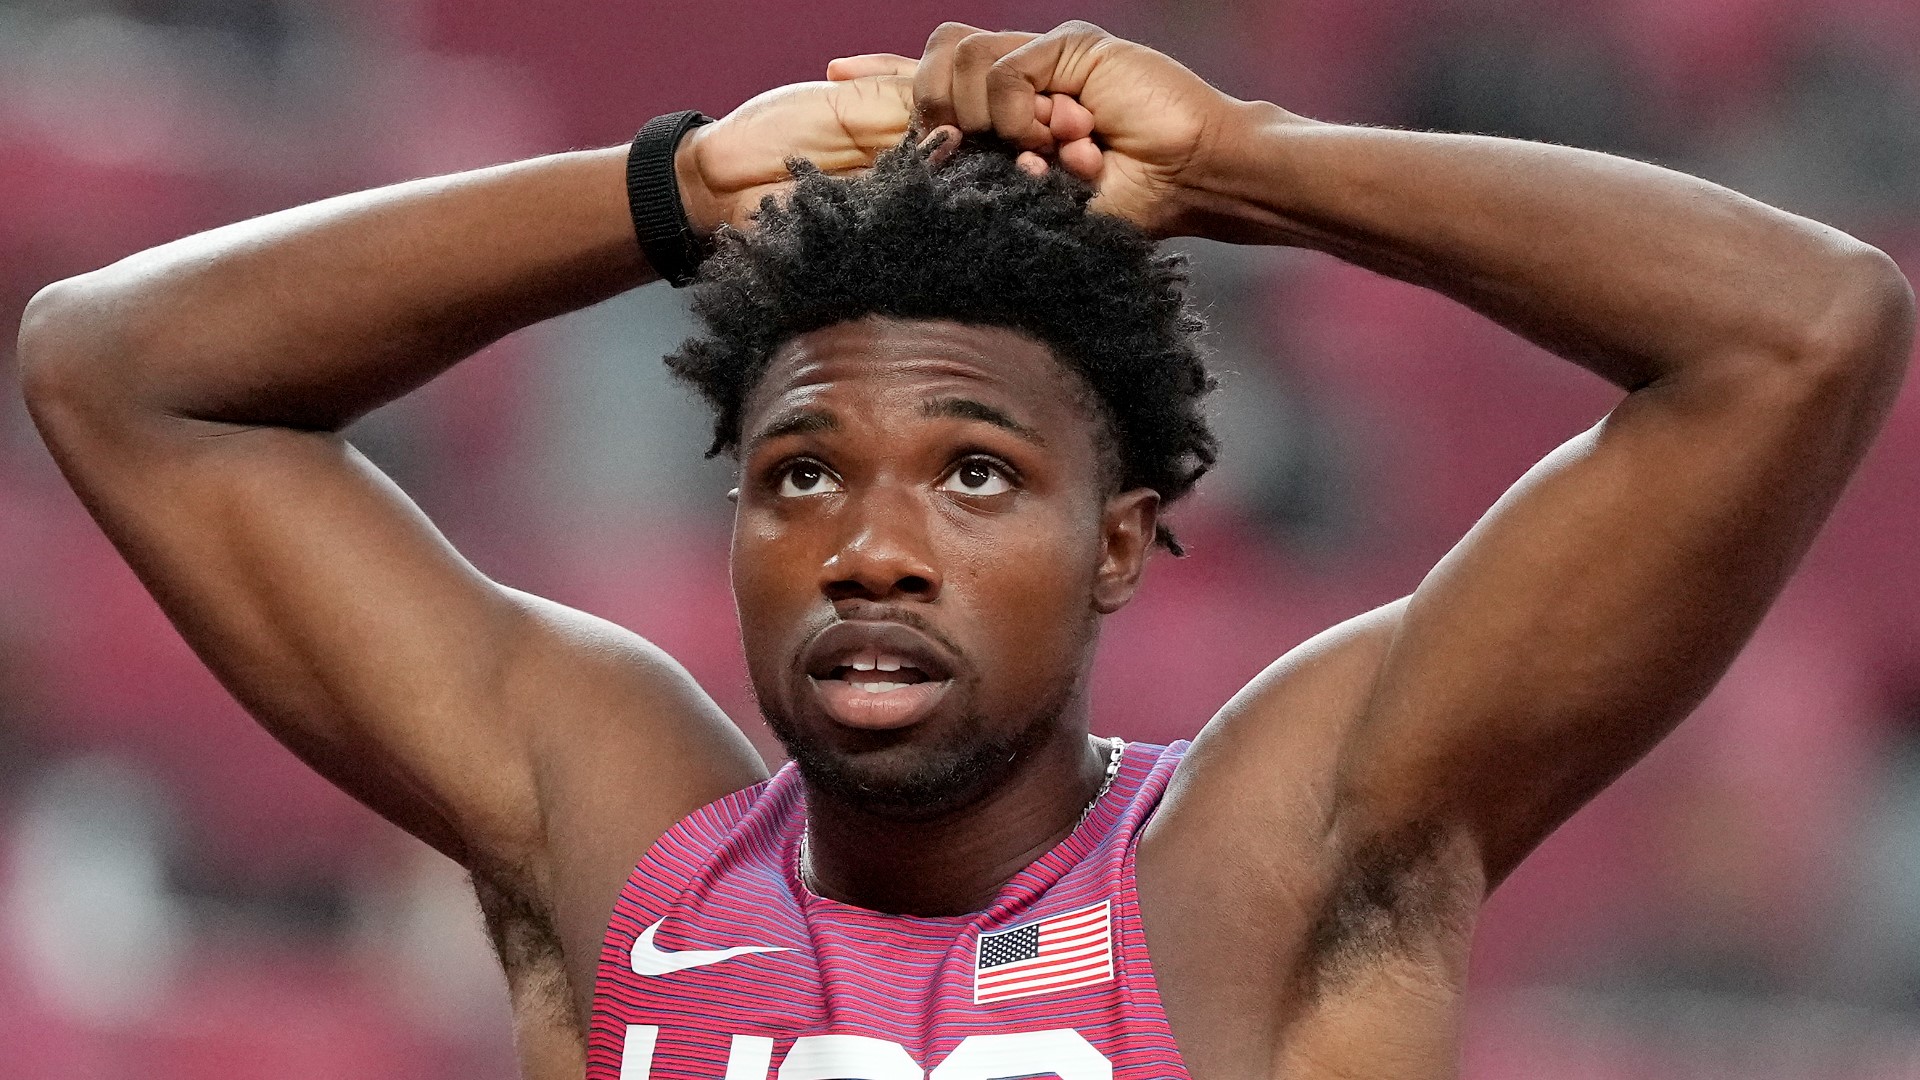 The U.S. could sweep the men's 200-meter race with Noah Lyles, Kenny Bednarek and Erriyon Knighton in the final, plus skateboarding wraps up competition Wednesday.